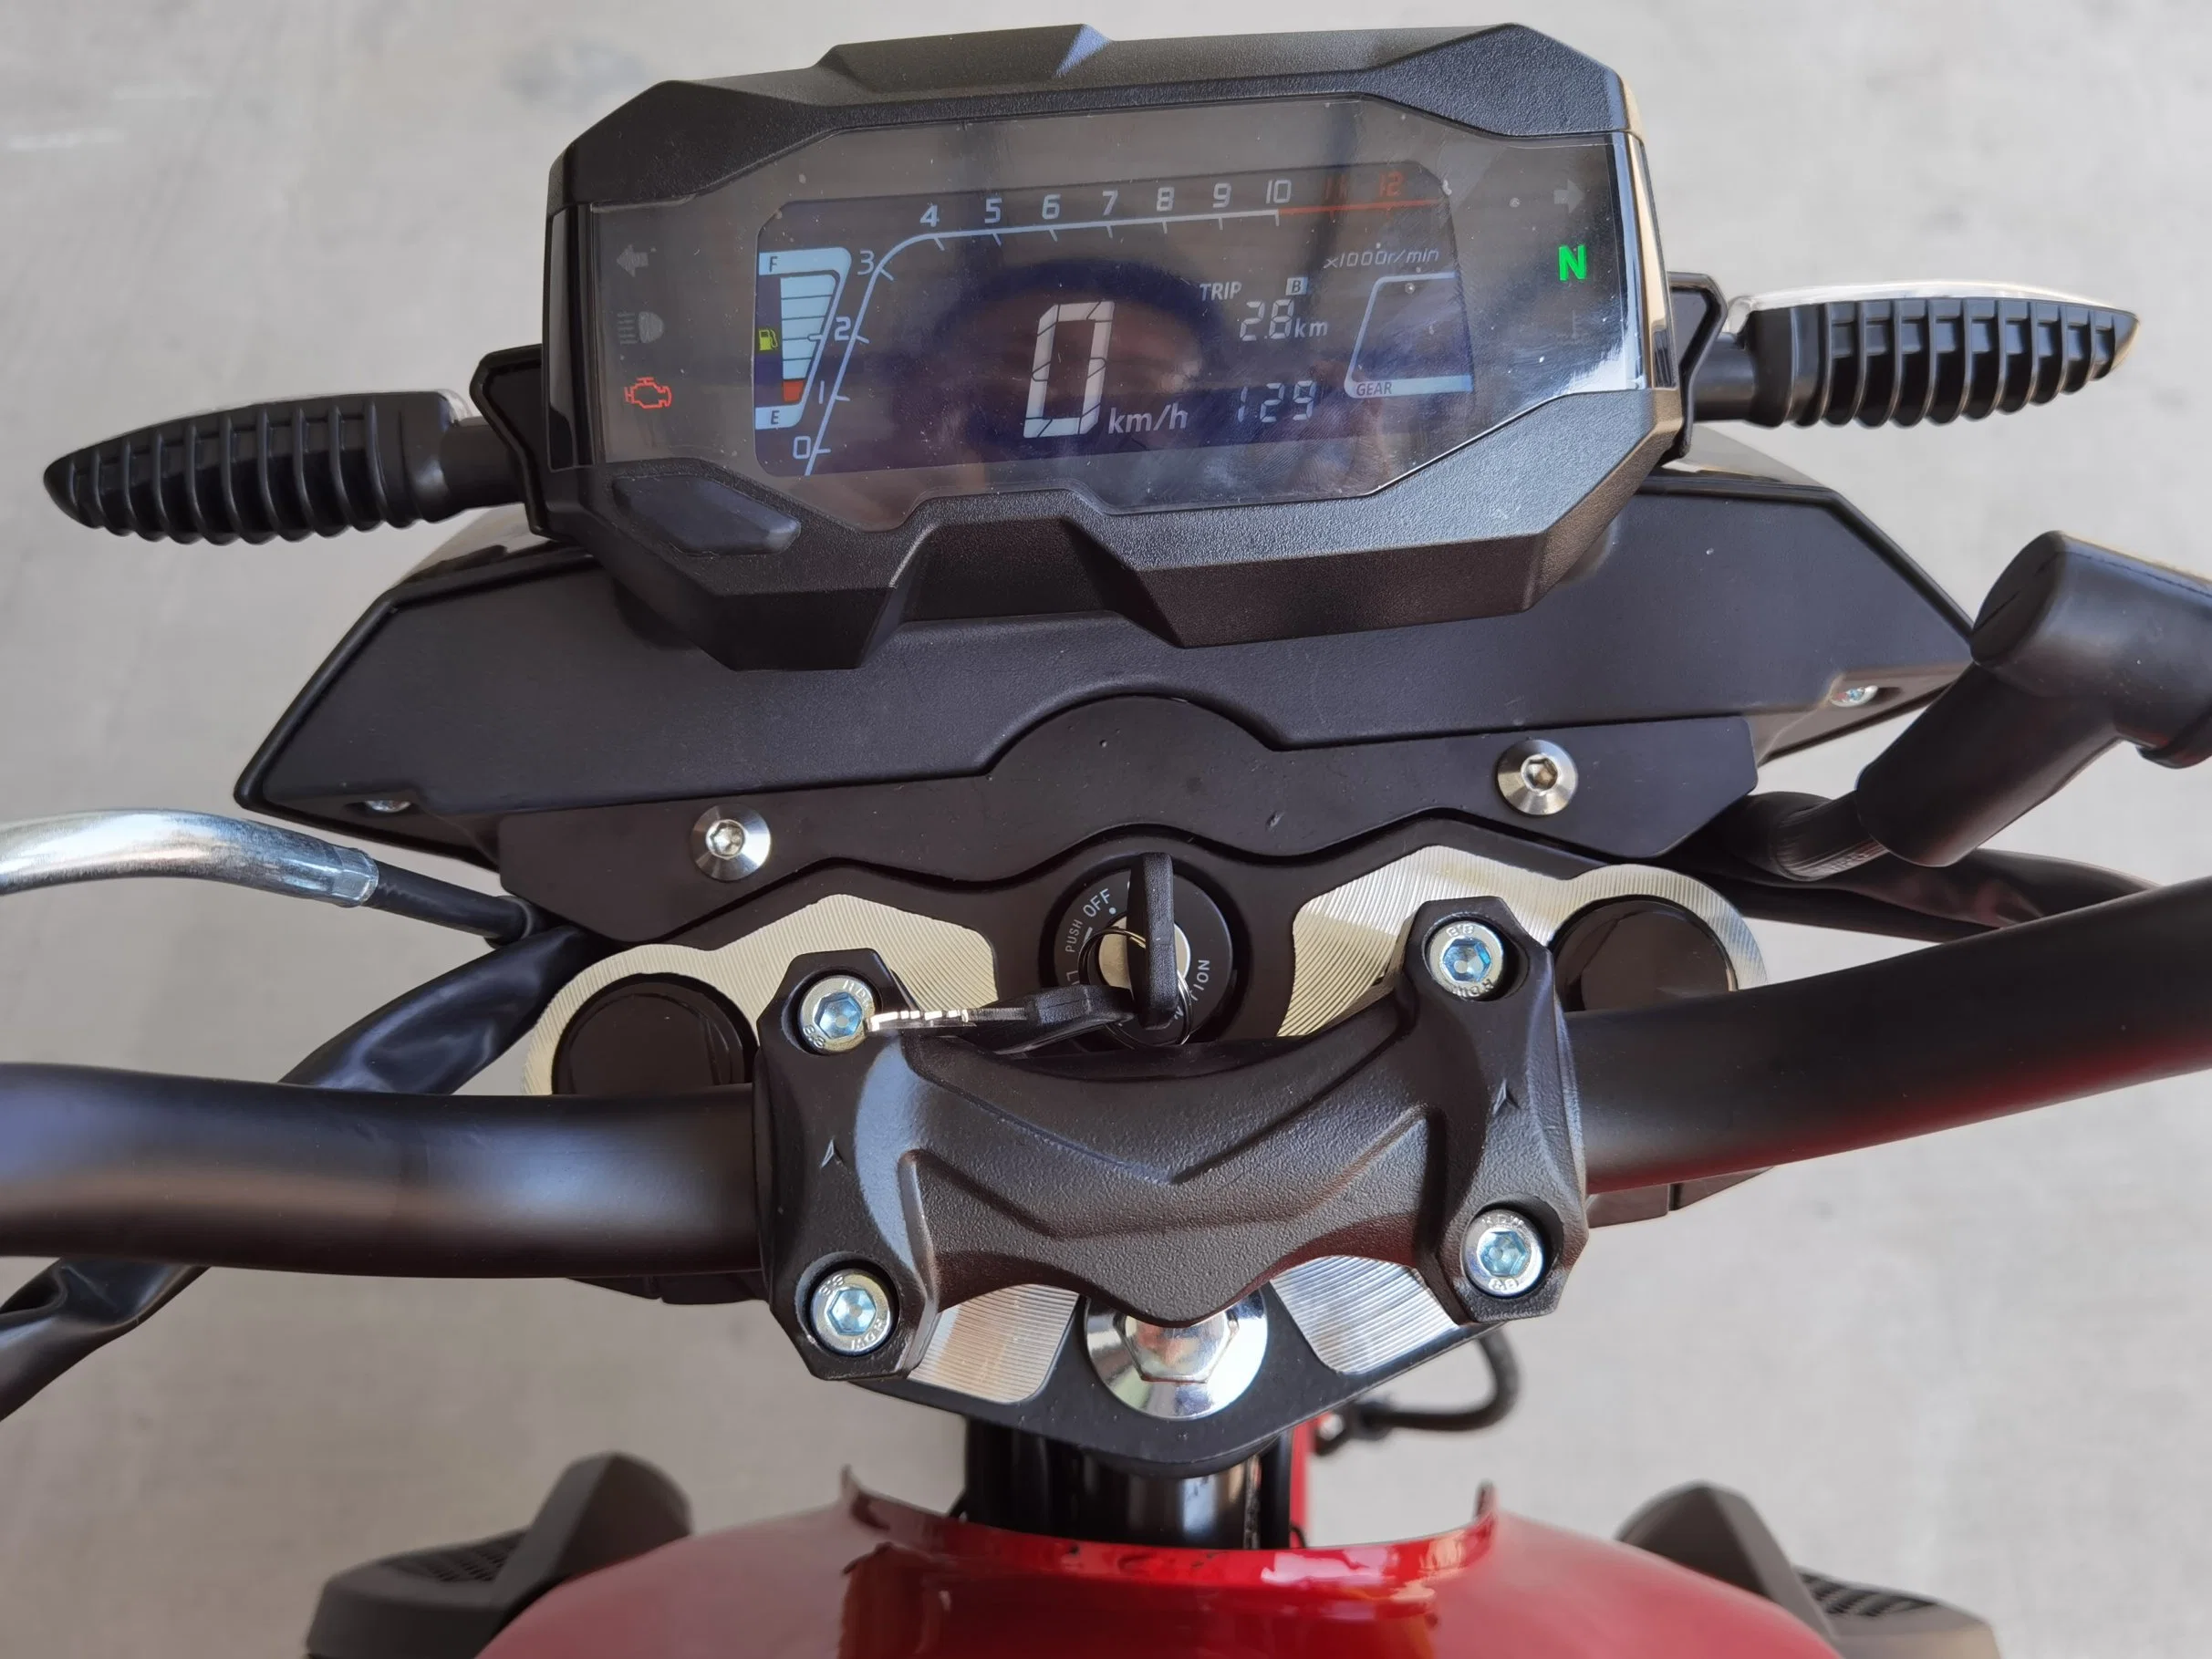 125cc/150cc/200cc/250cc New Design Gas Motorcycle with LED Light From YAMAHA (MT)